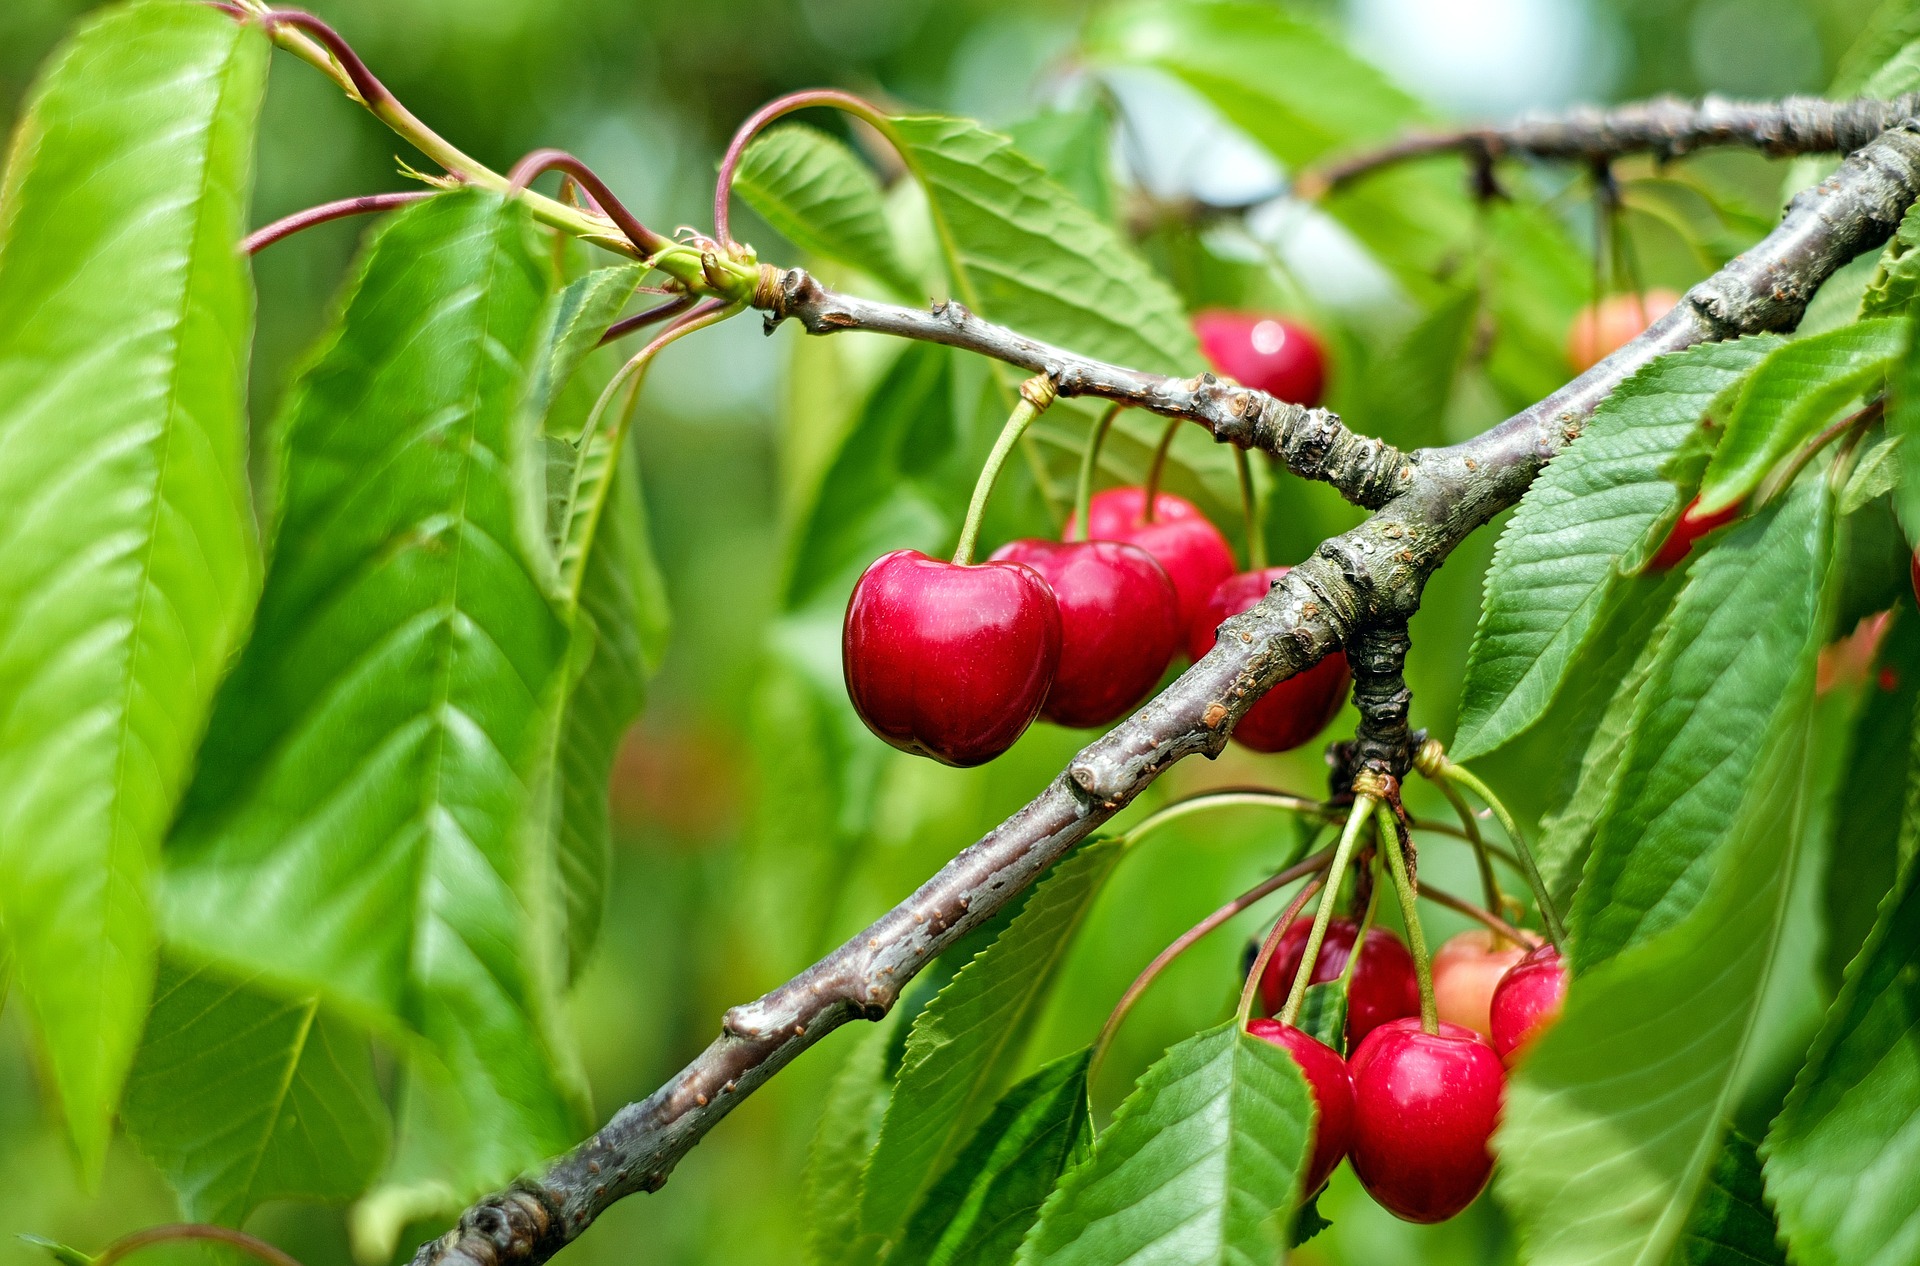 Cherries: How to Plant, Grow, and Harvest Cherries | The Old ...